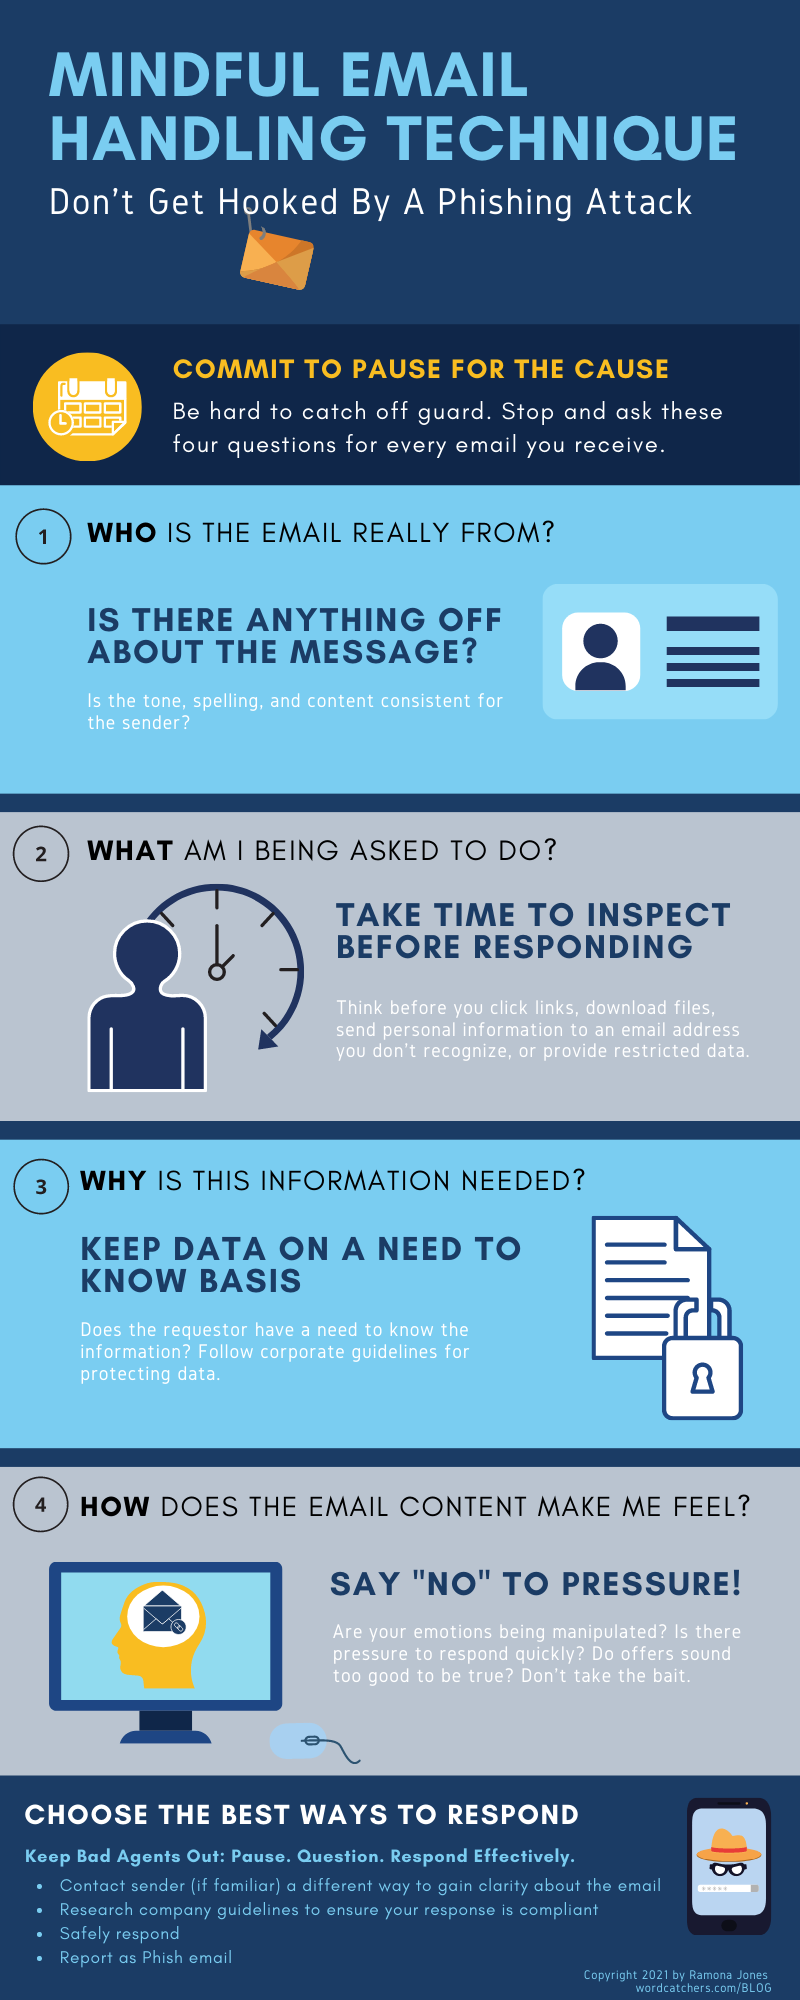 Four questions to ask before responding to email